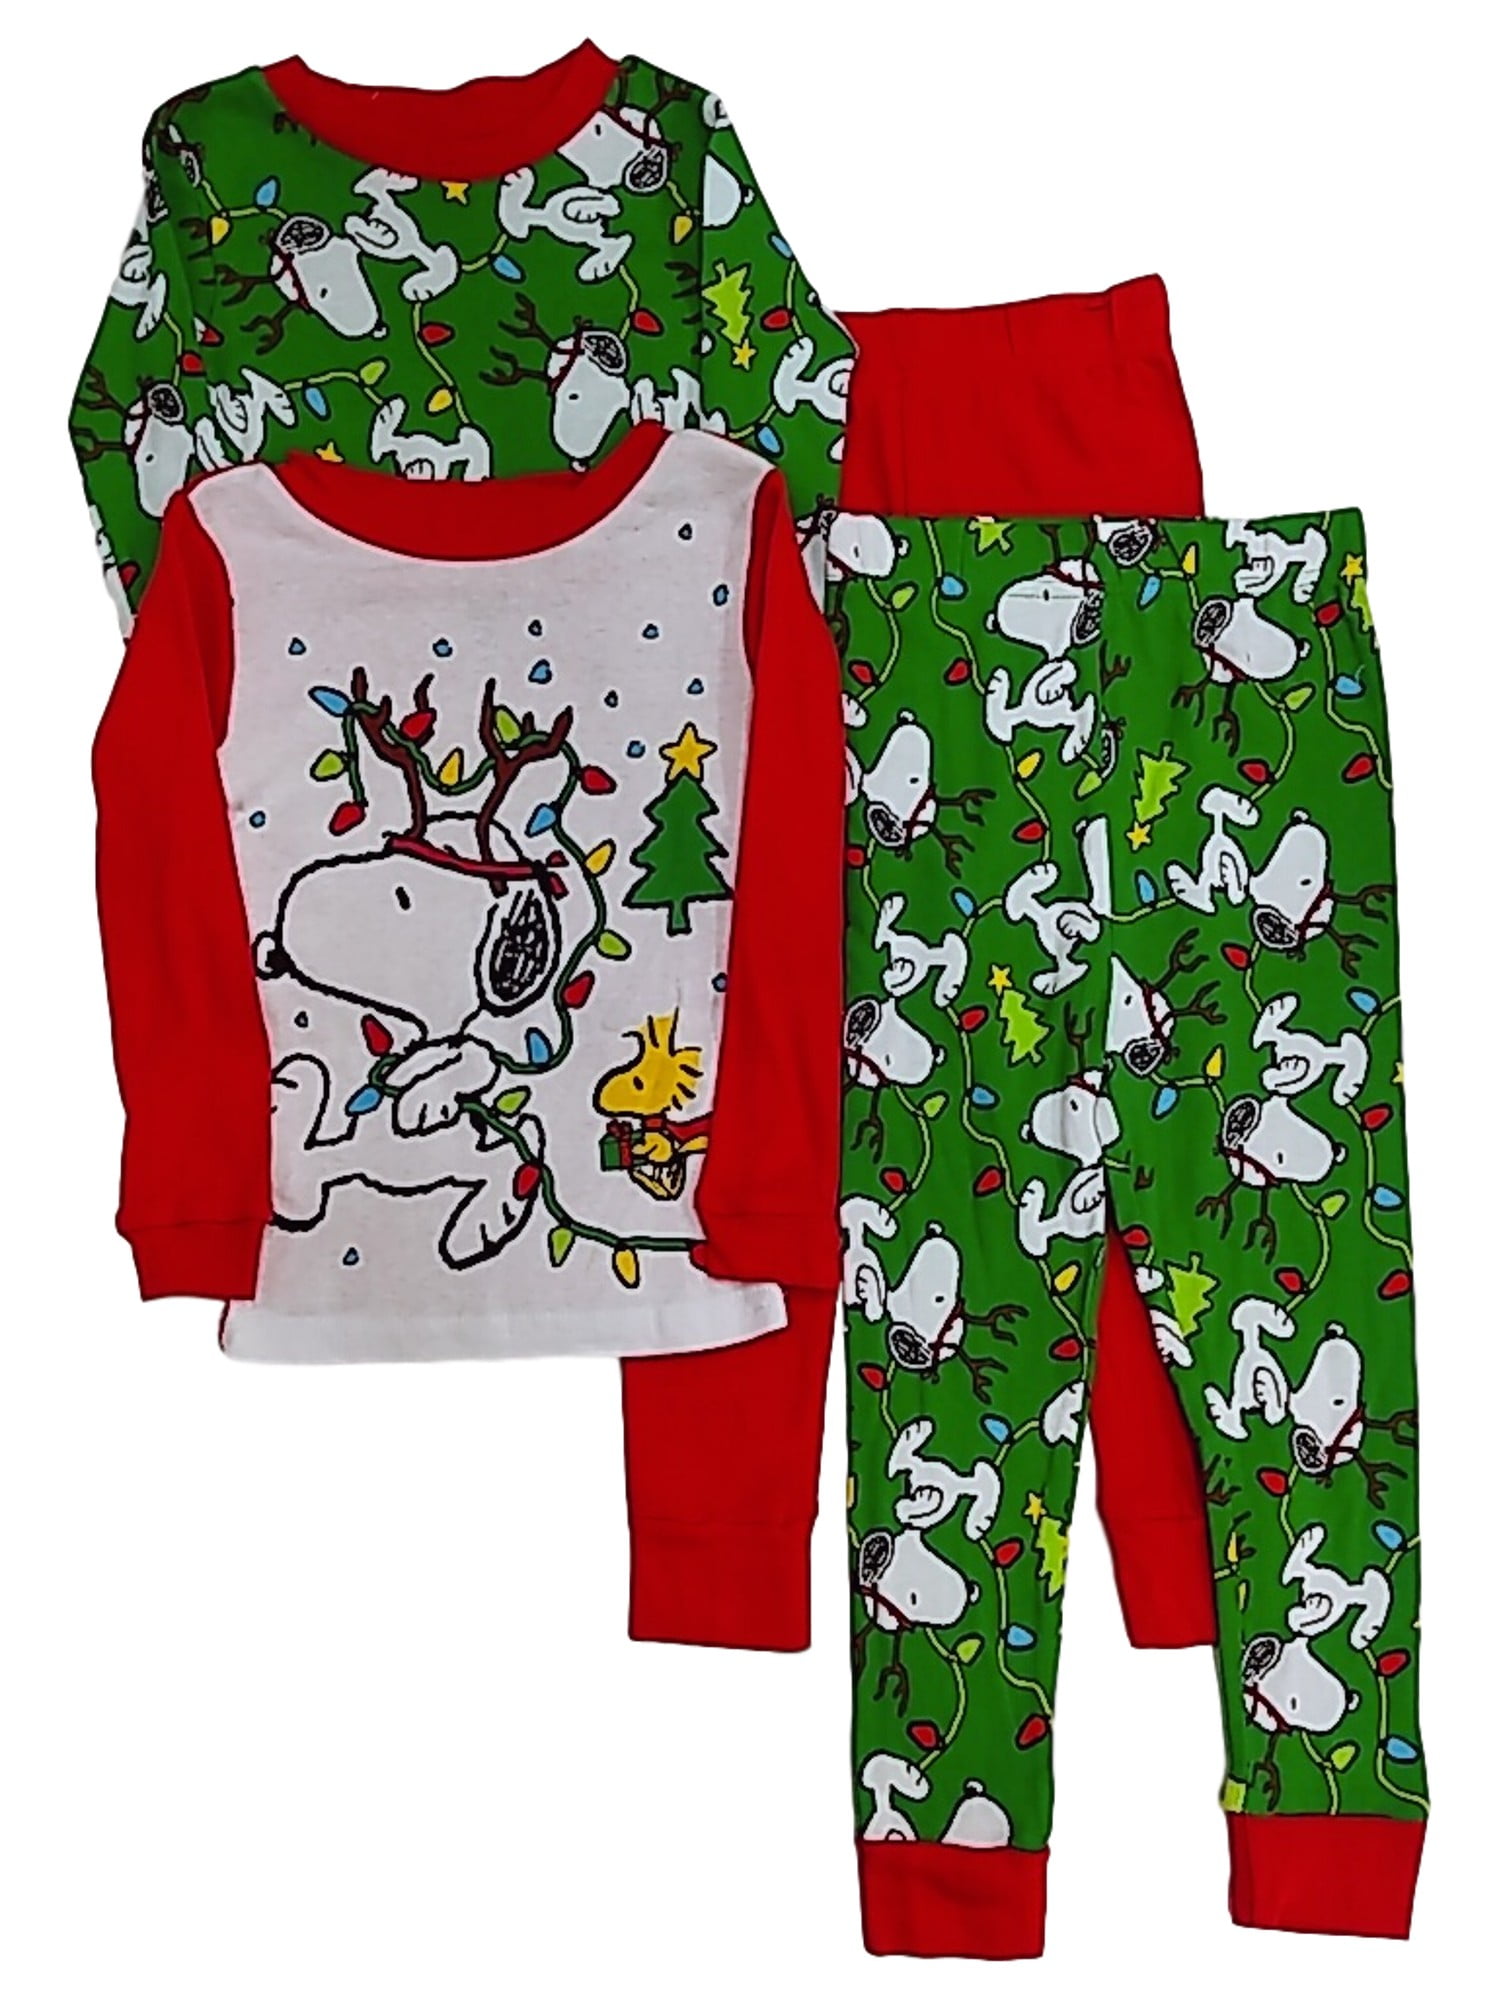 SNOOPY & WOODSTOCK  PAJAMAS--MADE TO FIT 18" DOLLS 